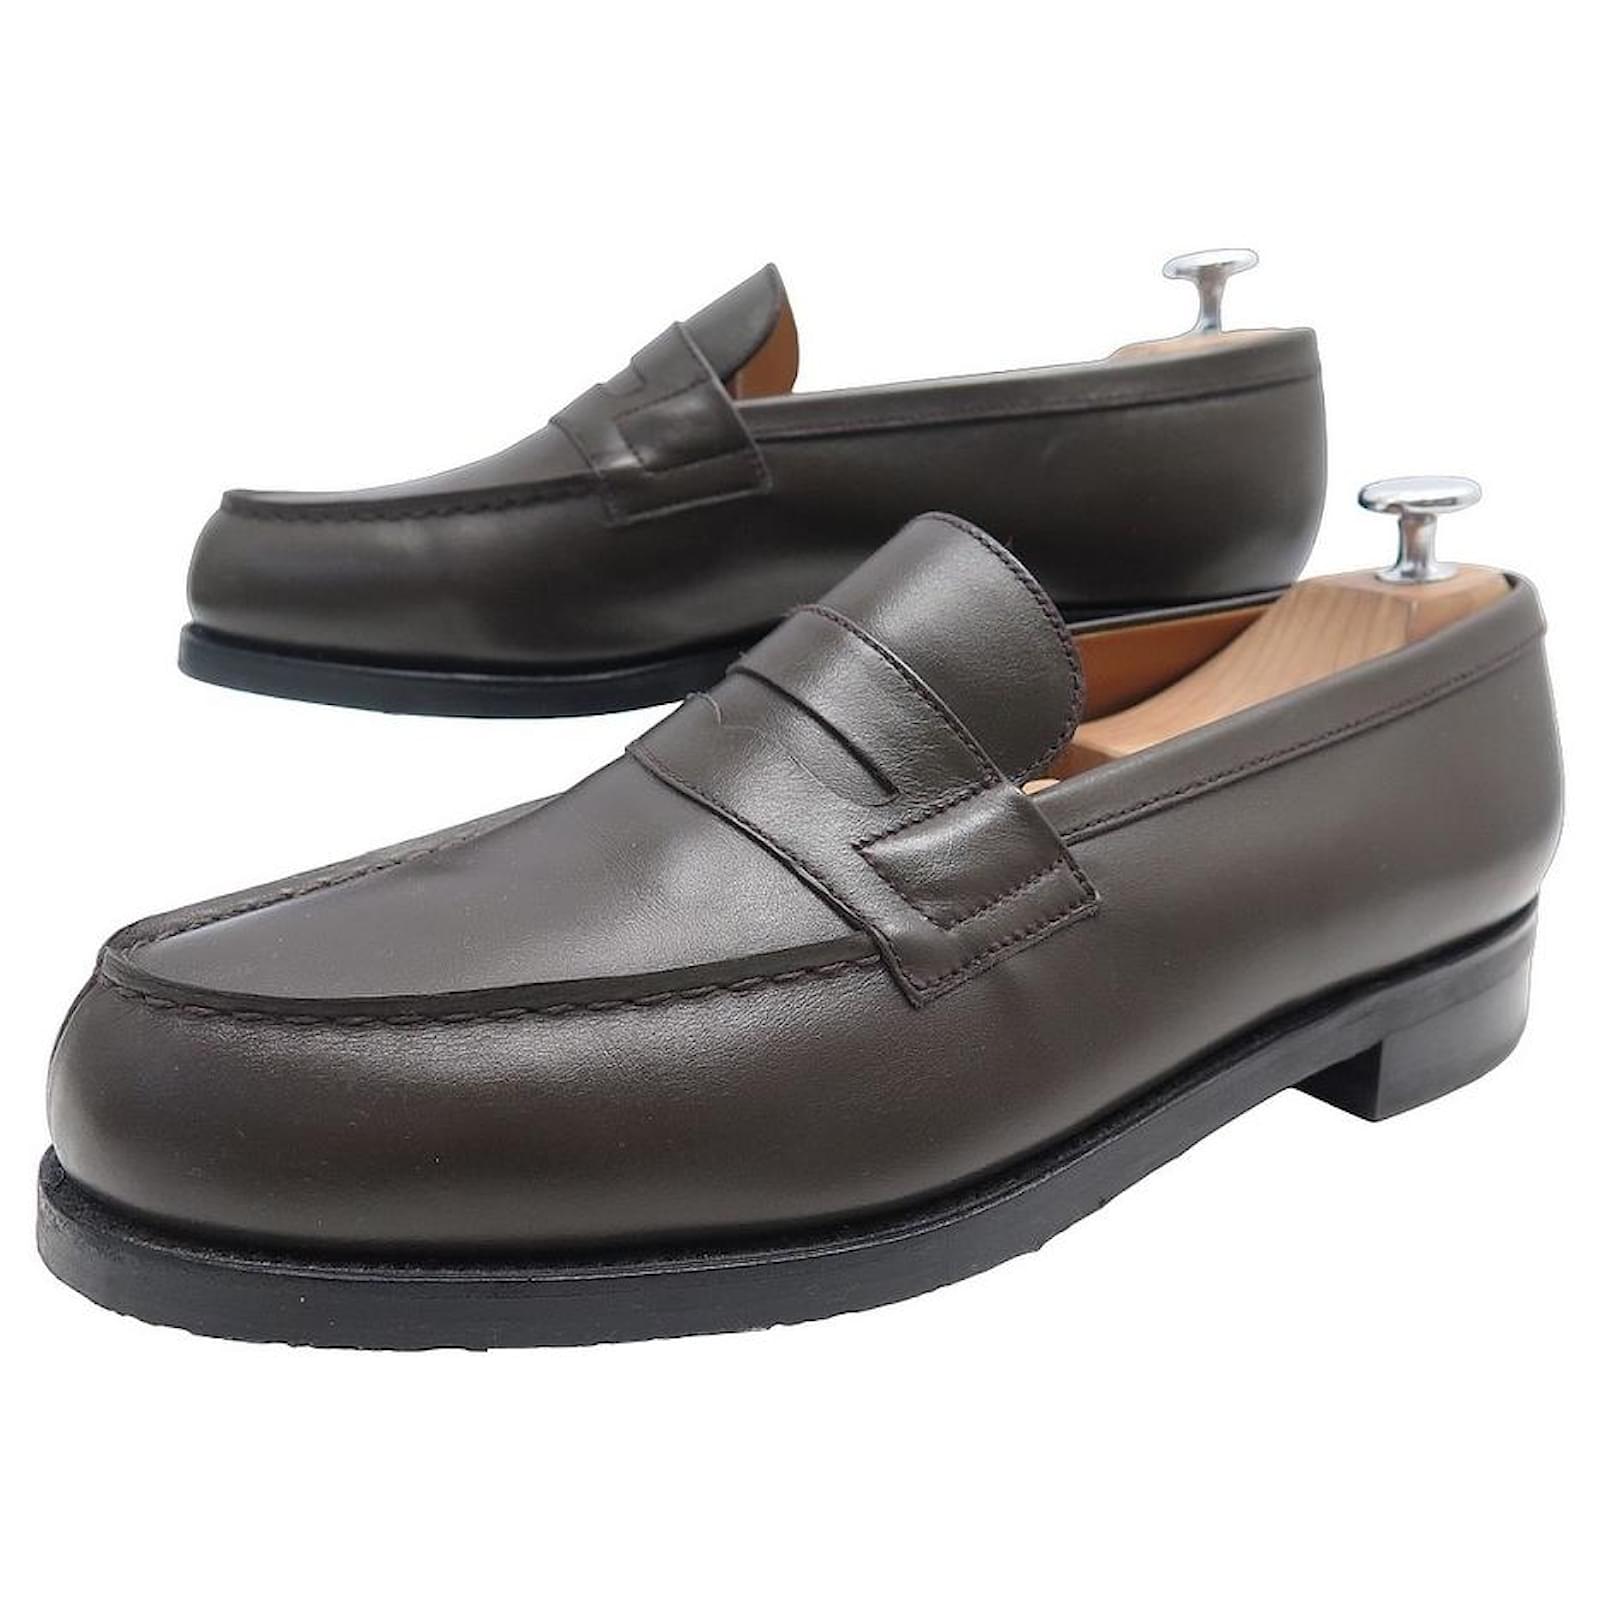 NEW JM WESTON SHOES 180 Church´s Loafers 7.5D 41.5 wide 42 LEATHER